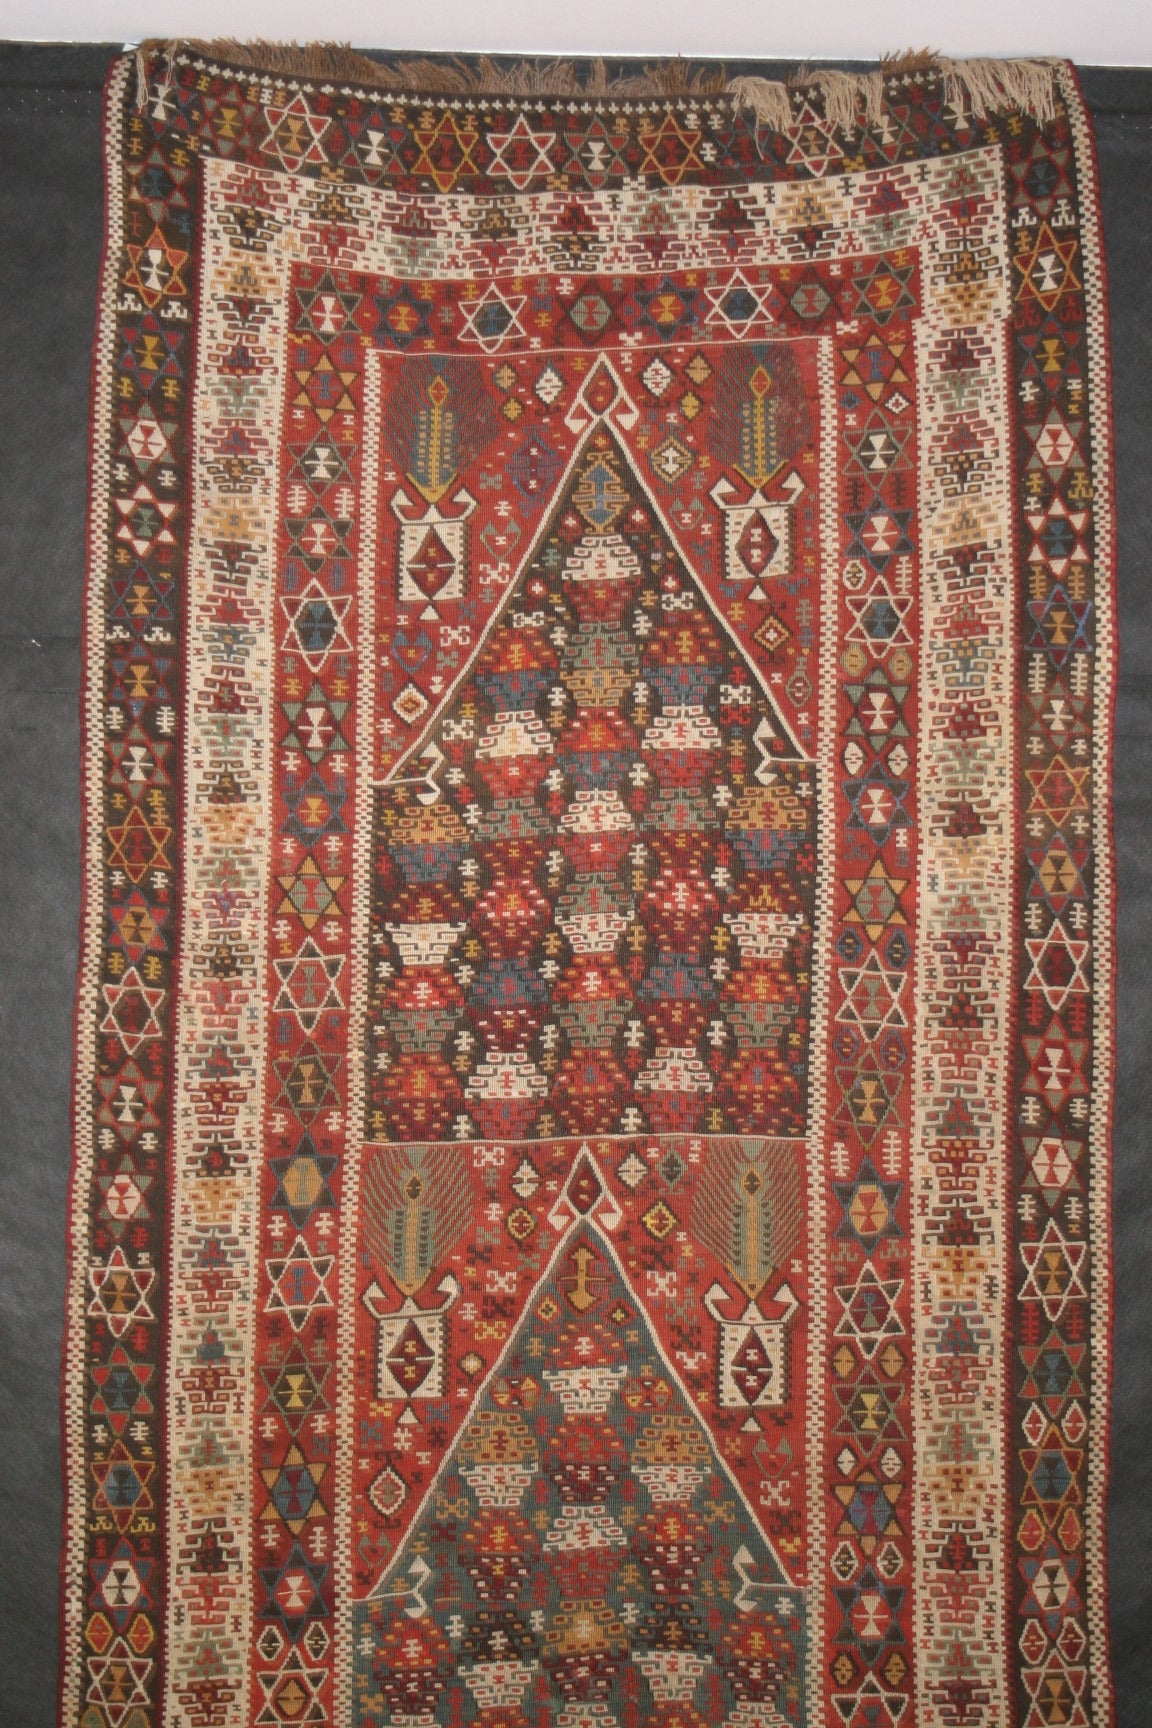 This is a very unusual example of a wedding Kilim (flat-weave), woven in eastern Turkey during the end of the 19th century Ottoman period. The very best, highest quality flat woven rugs of this period were woven in this region of Asia Minor. This